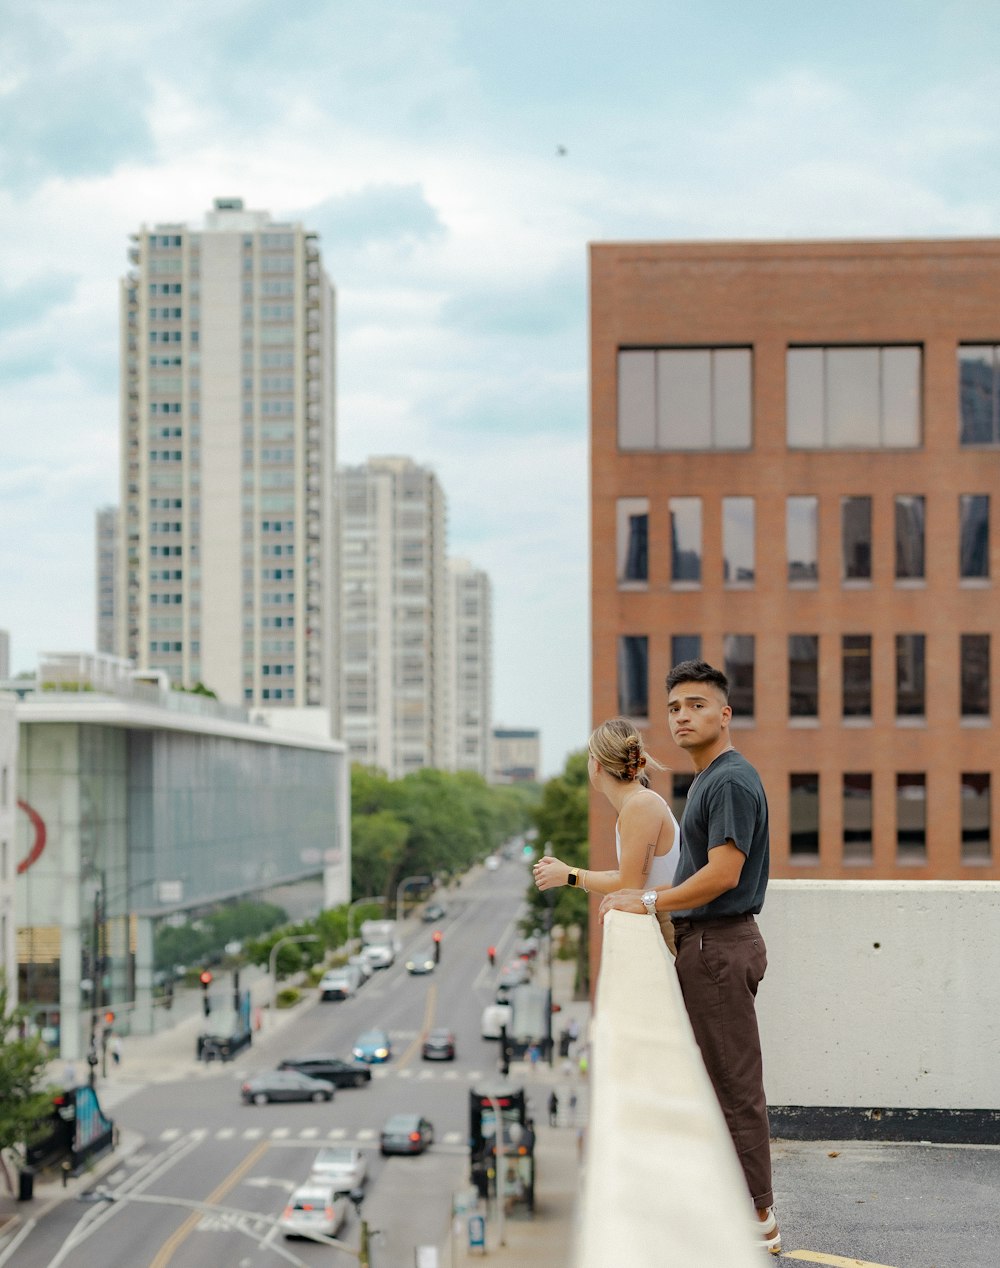 a man and woman posing for a picture on a rooftop